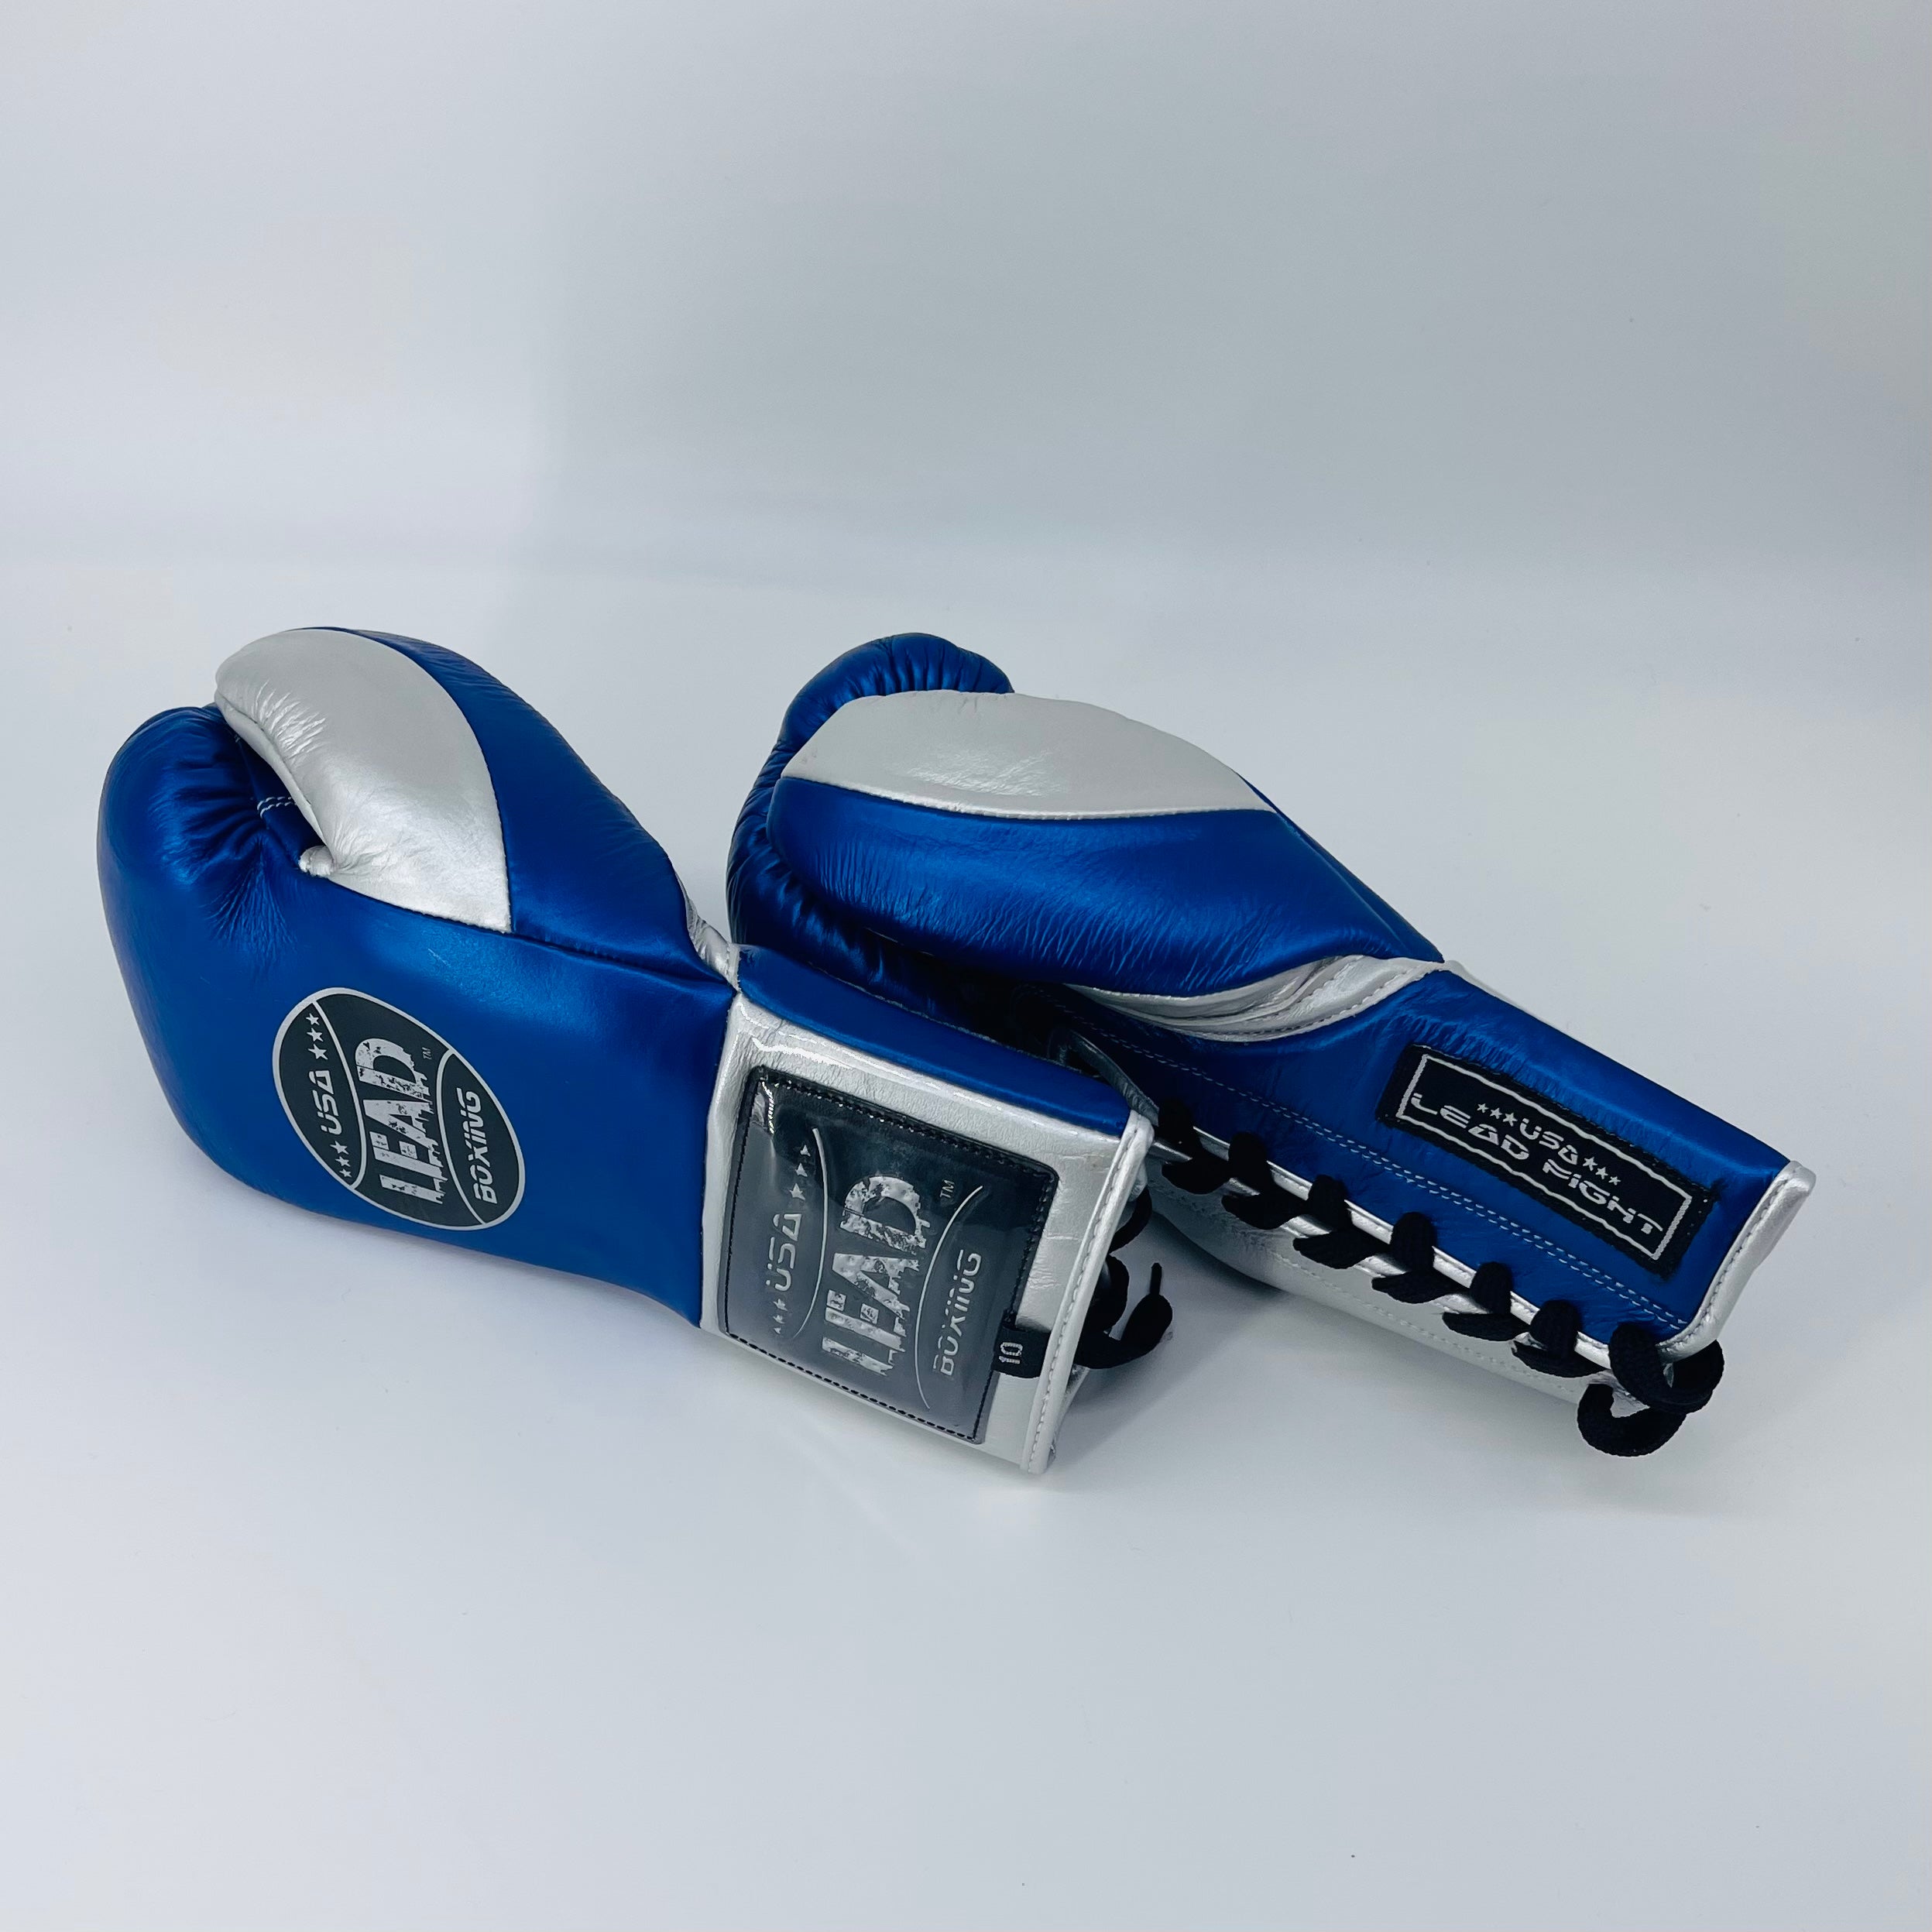 LEAD Boxing Fight Gloves (Metallic Blue/Silver)